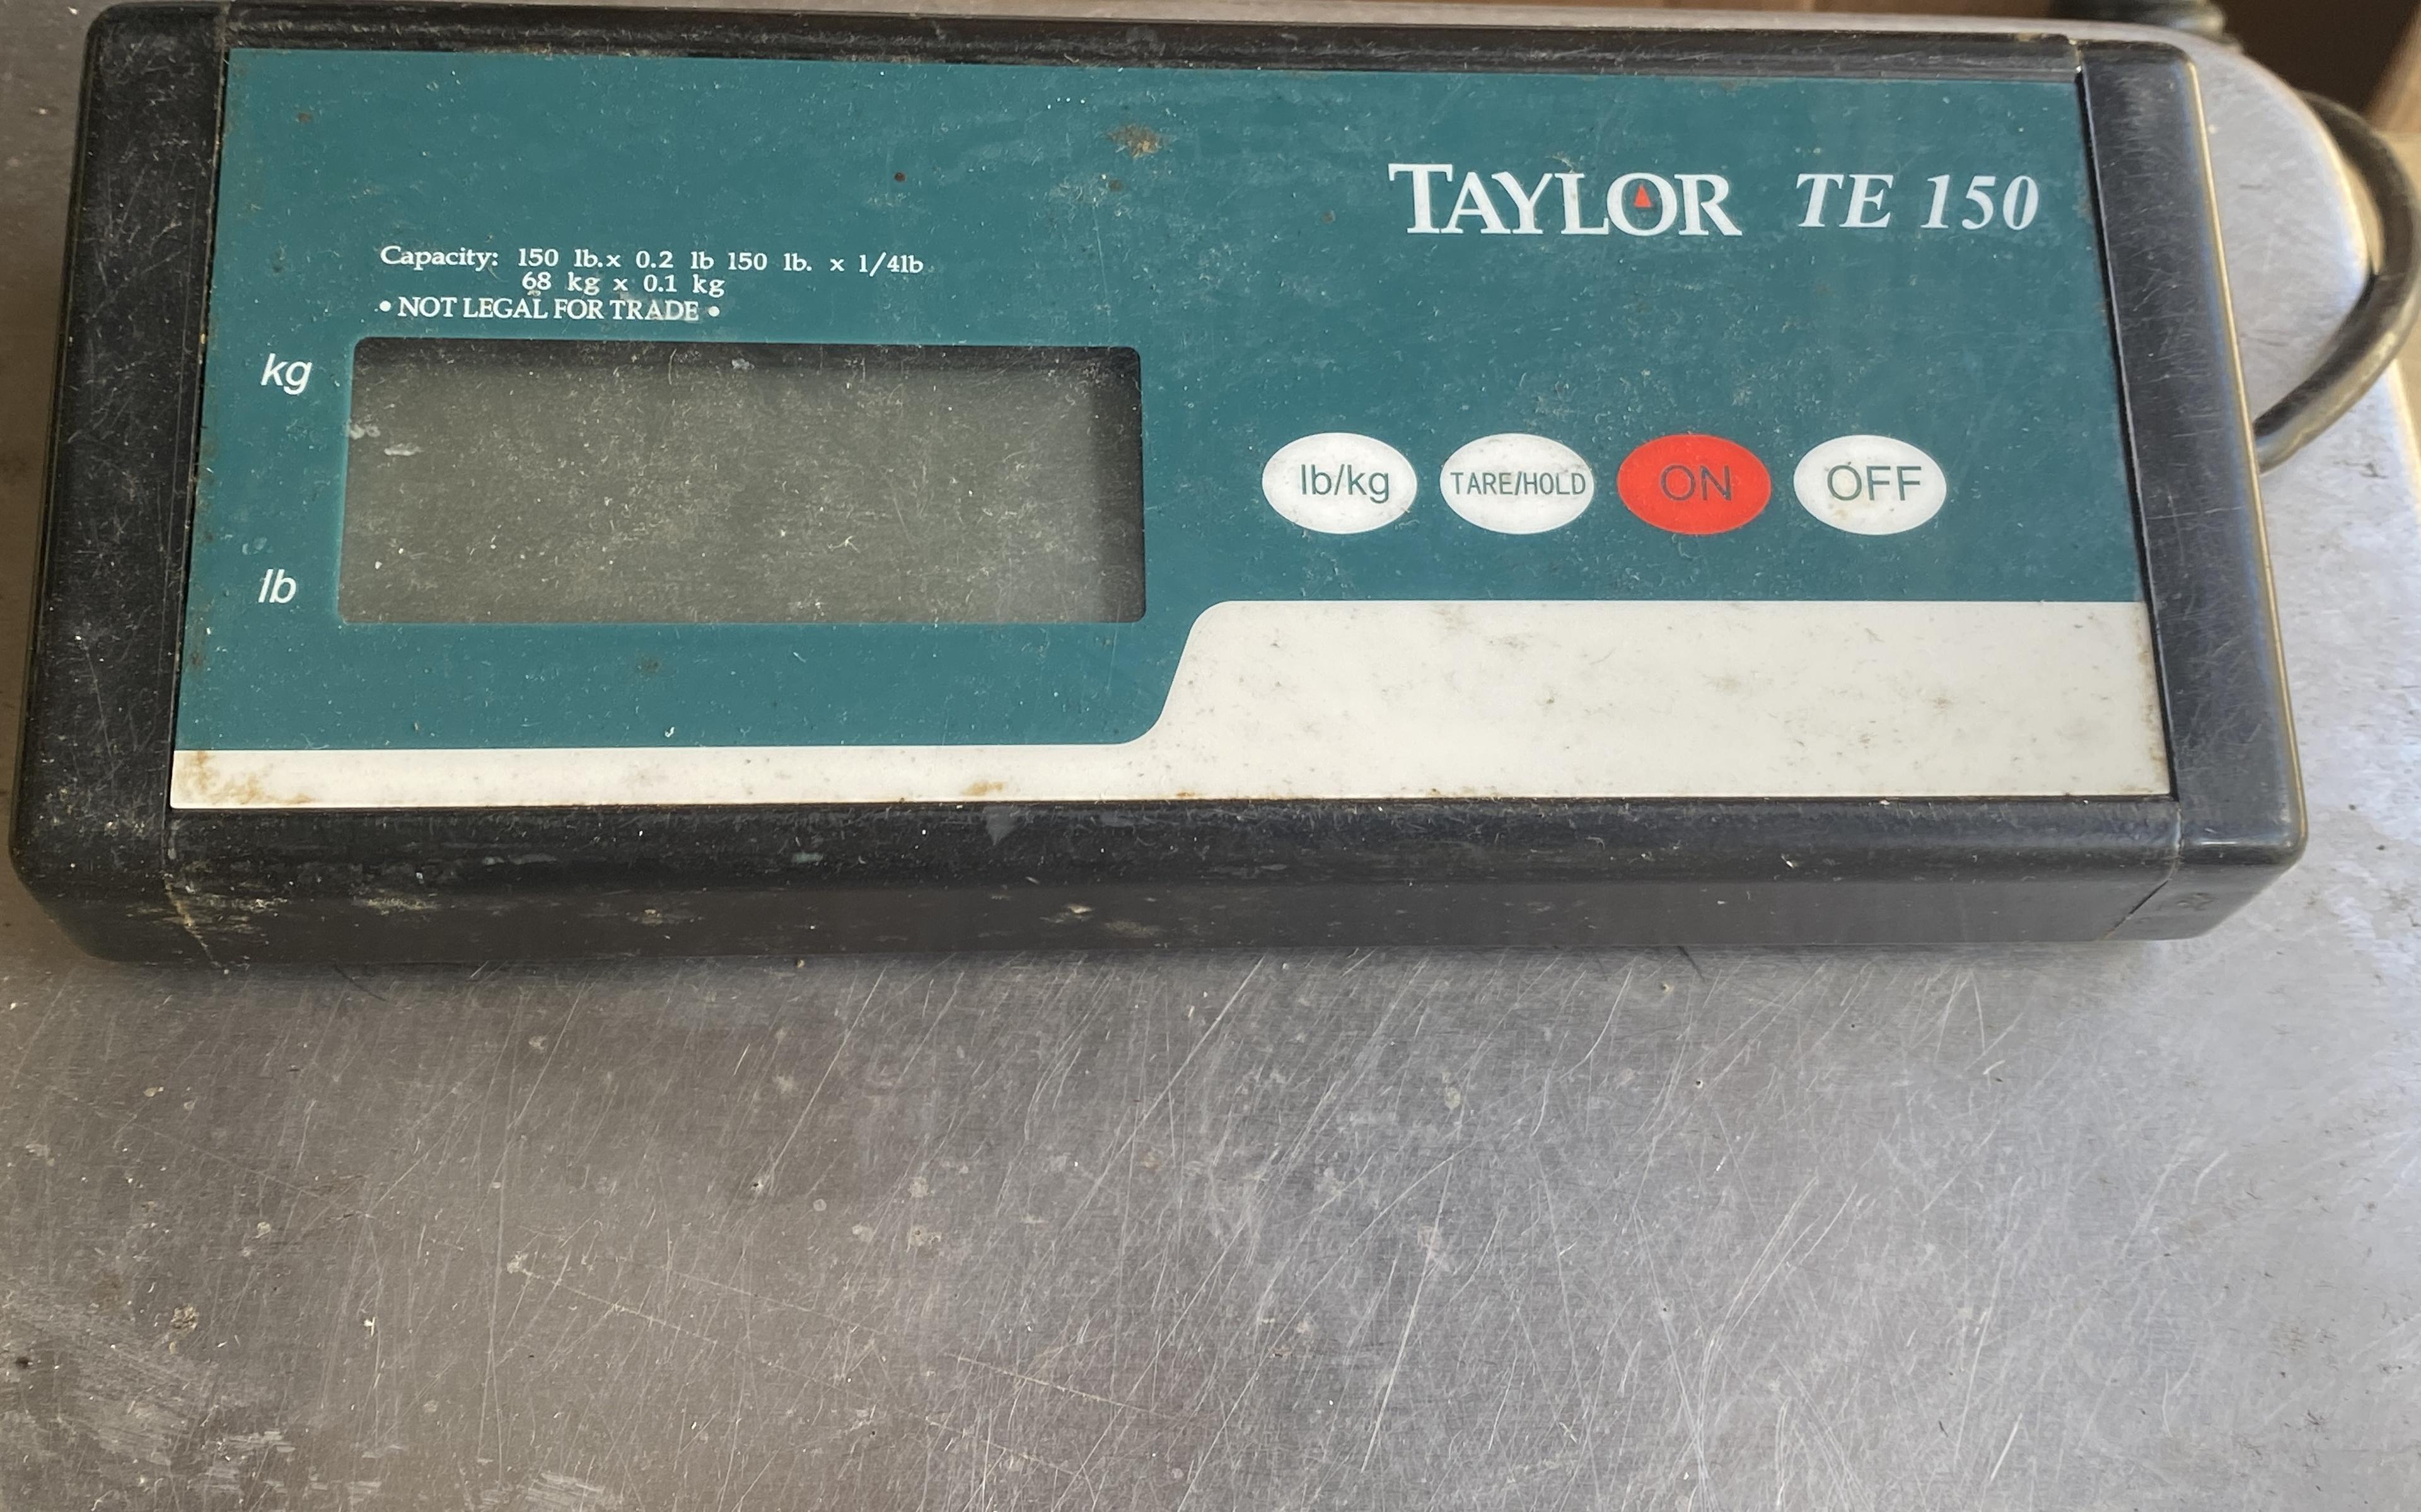 Taylor TE 150 digital platform scale with a 12” x 12” stainless steel platform weighs up to 150 poun